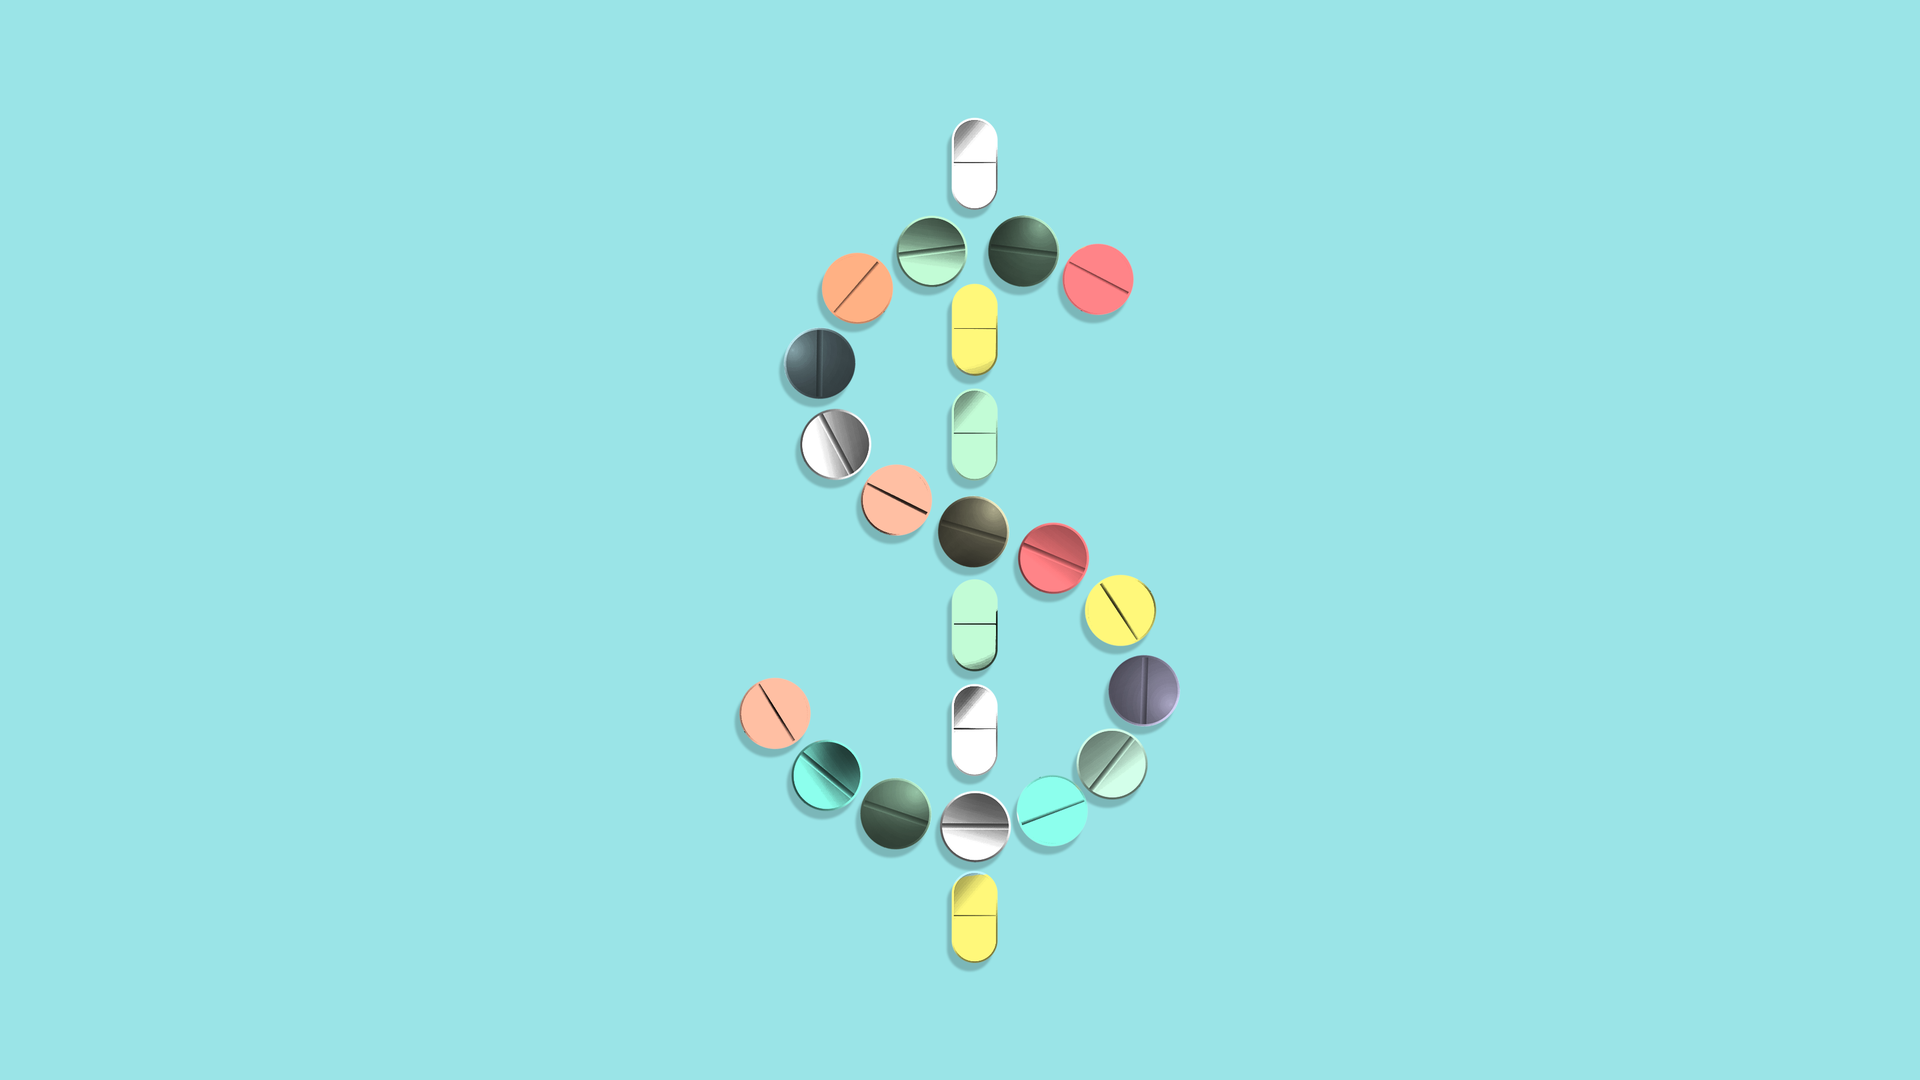 Illustration of pills in the shape of a money sign